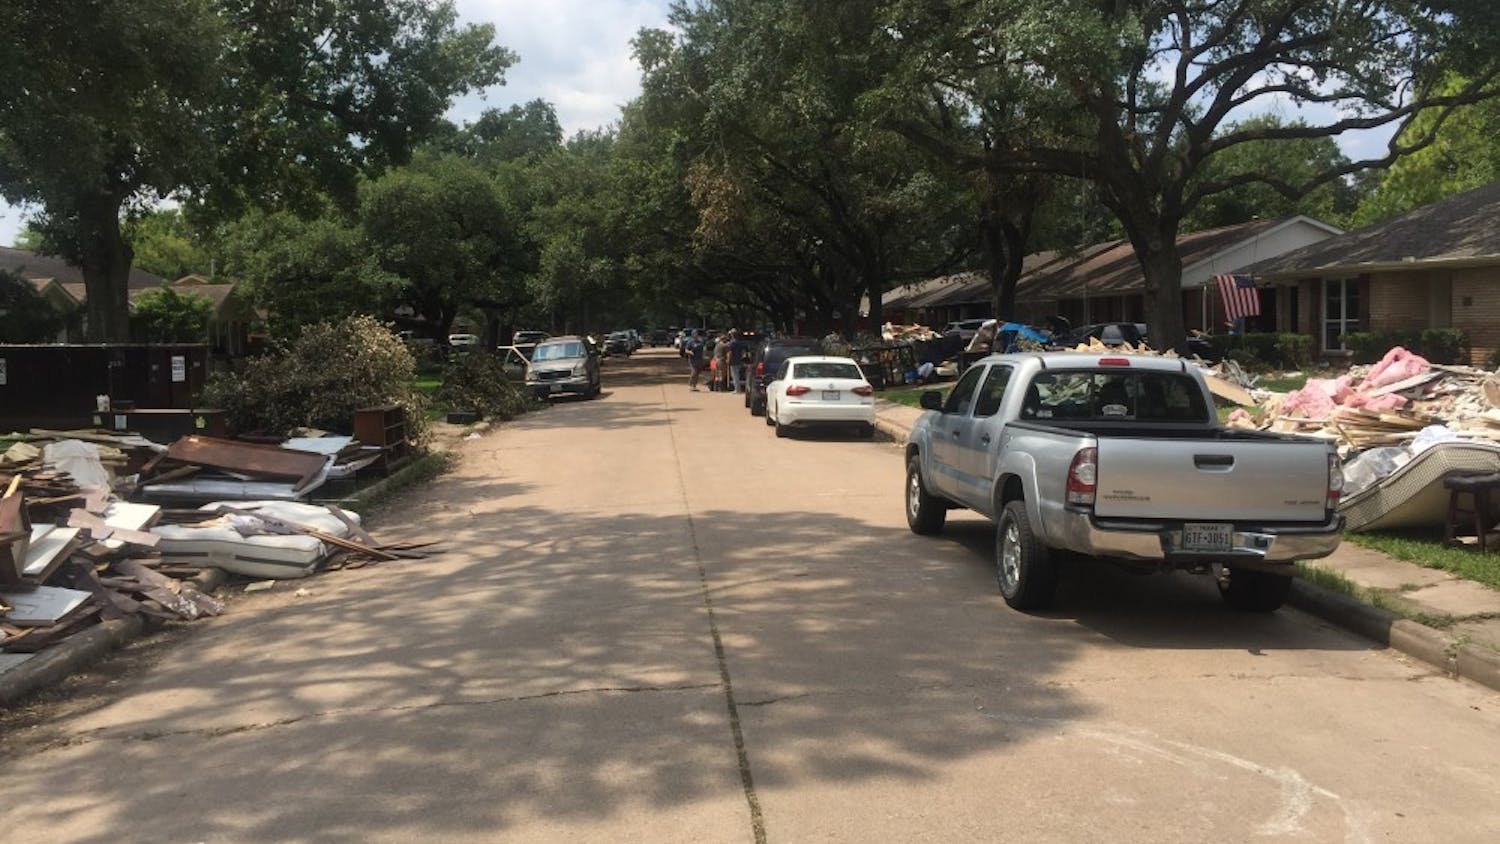 A residential street in Houston, Texas during the cleanup process after Hurricane Harvey in 2017. (Photo courtesy of  Valerie Mueller)